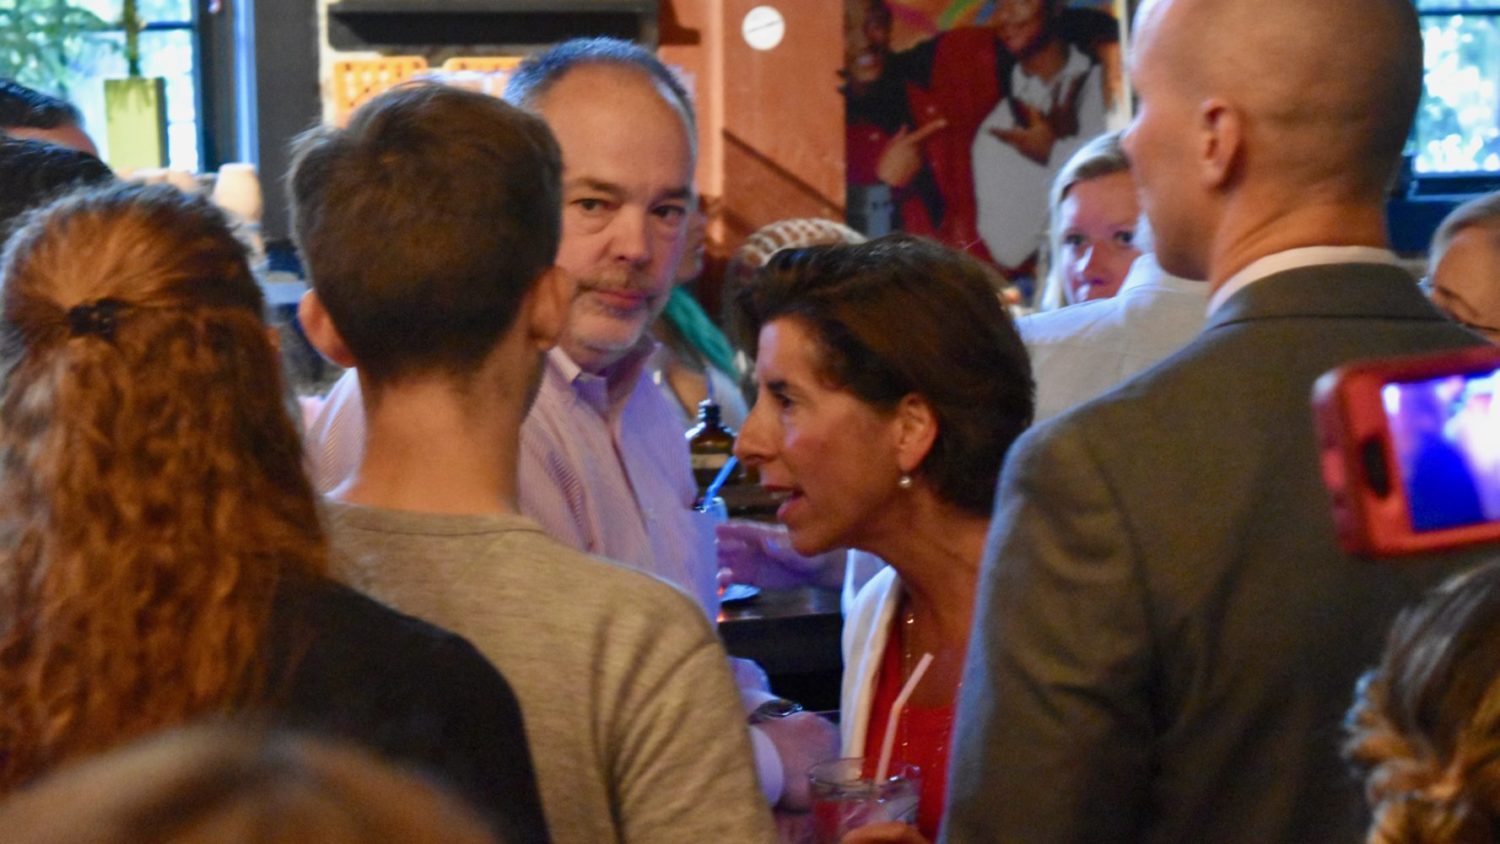 Raimondo challenged by environmental groups at campaign event